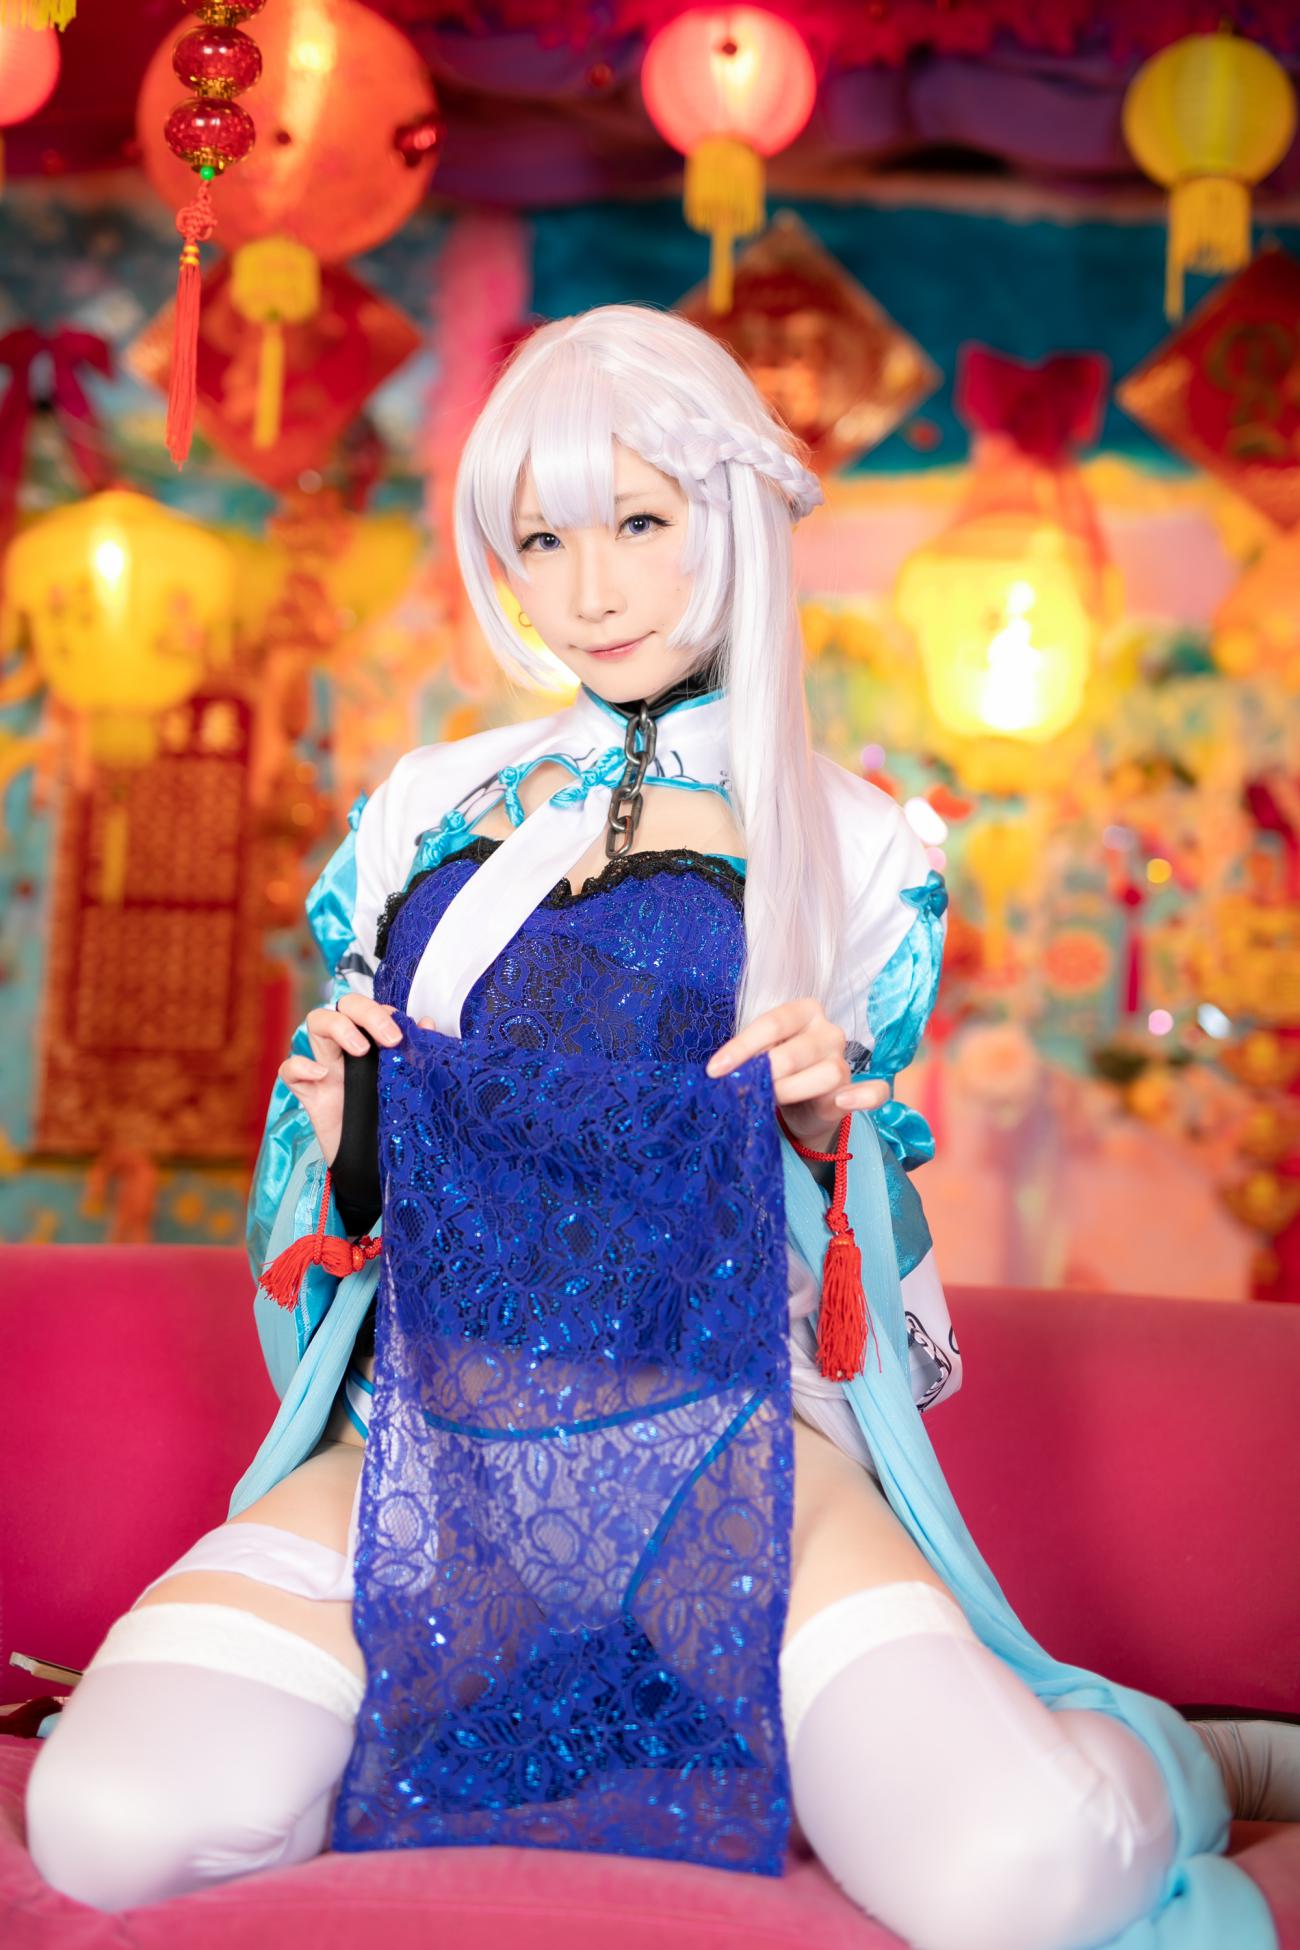 Cosplay C98 my suite あつき スイートレーン9 春節 - COSPLAY -